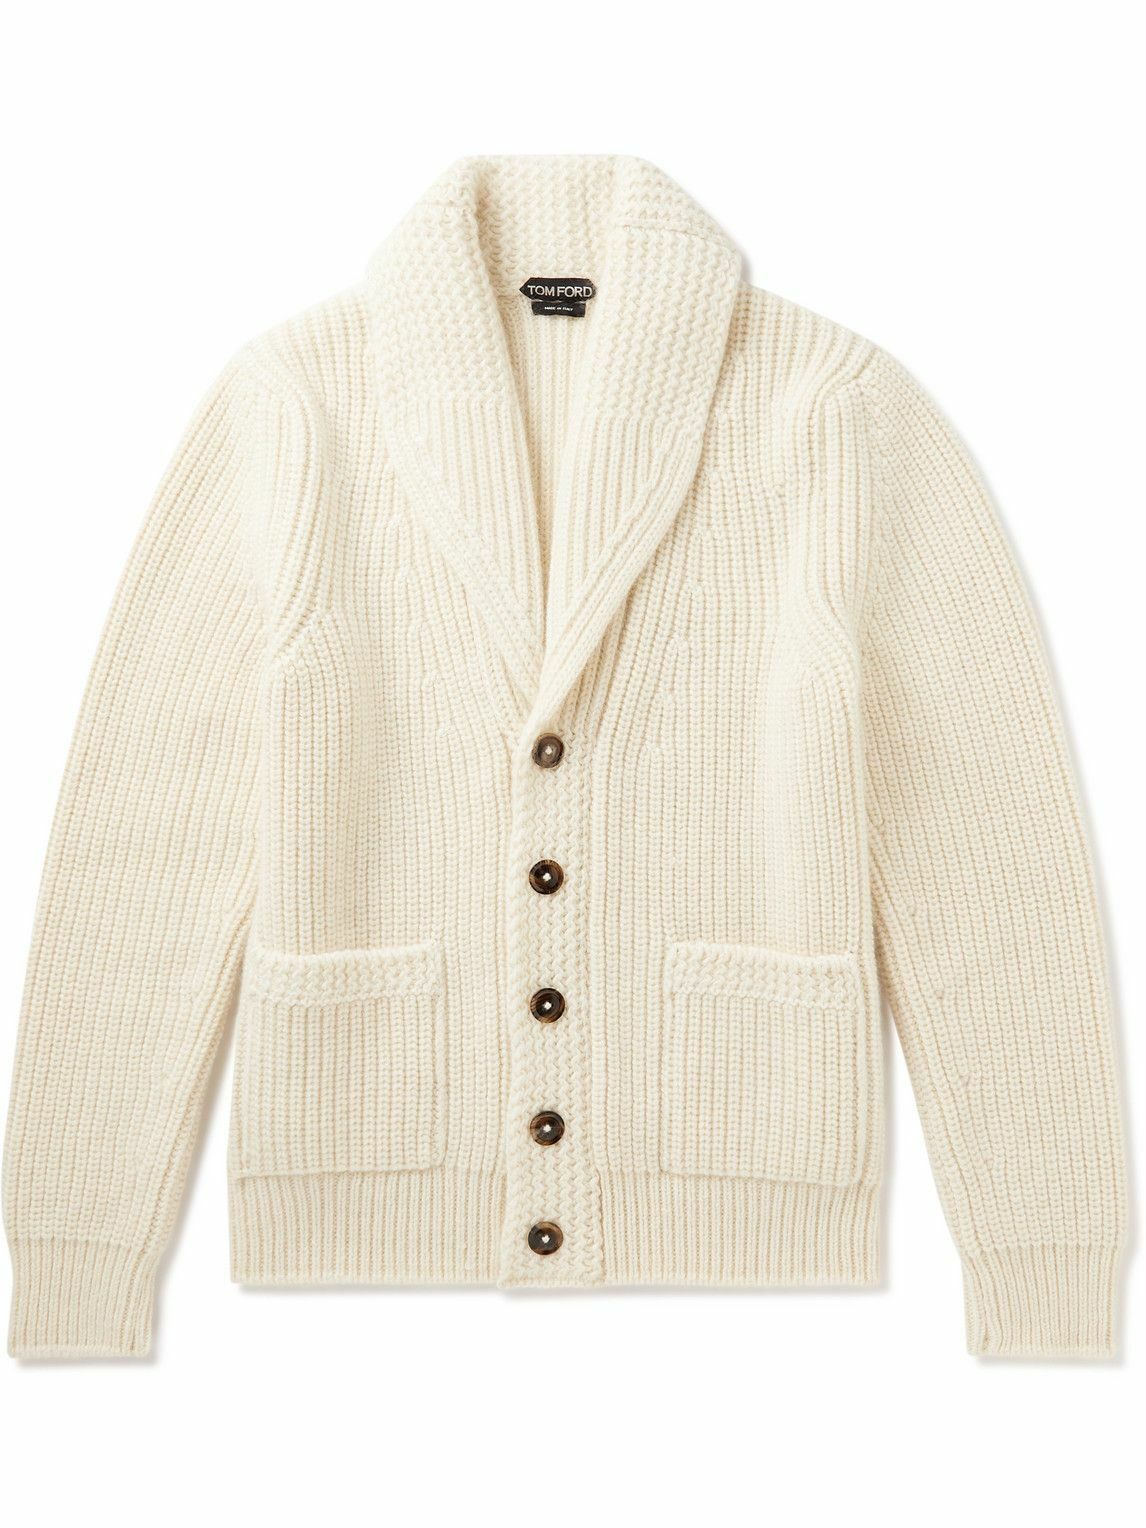 TOM FORD - Shawl-Collar Cashmere and Mohair-Blend Cardigan - Neutrals ...